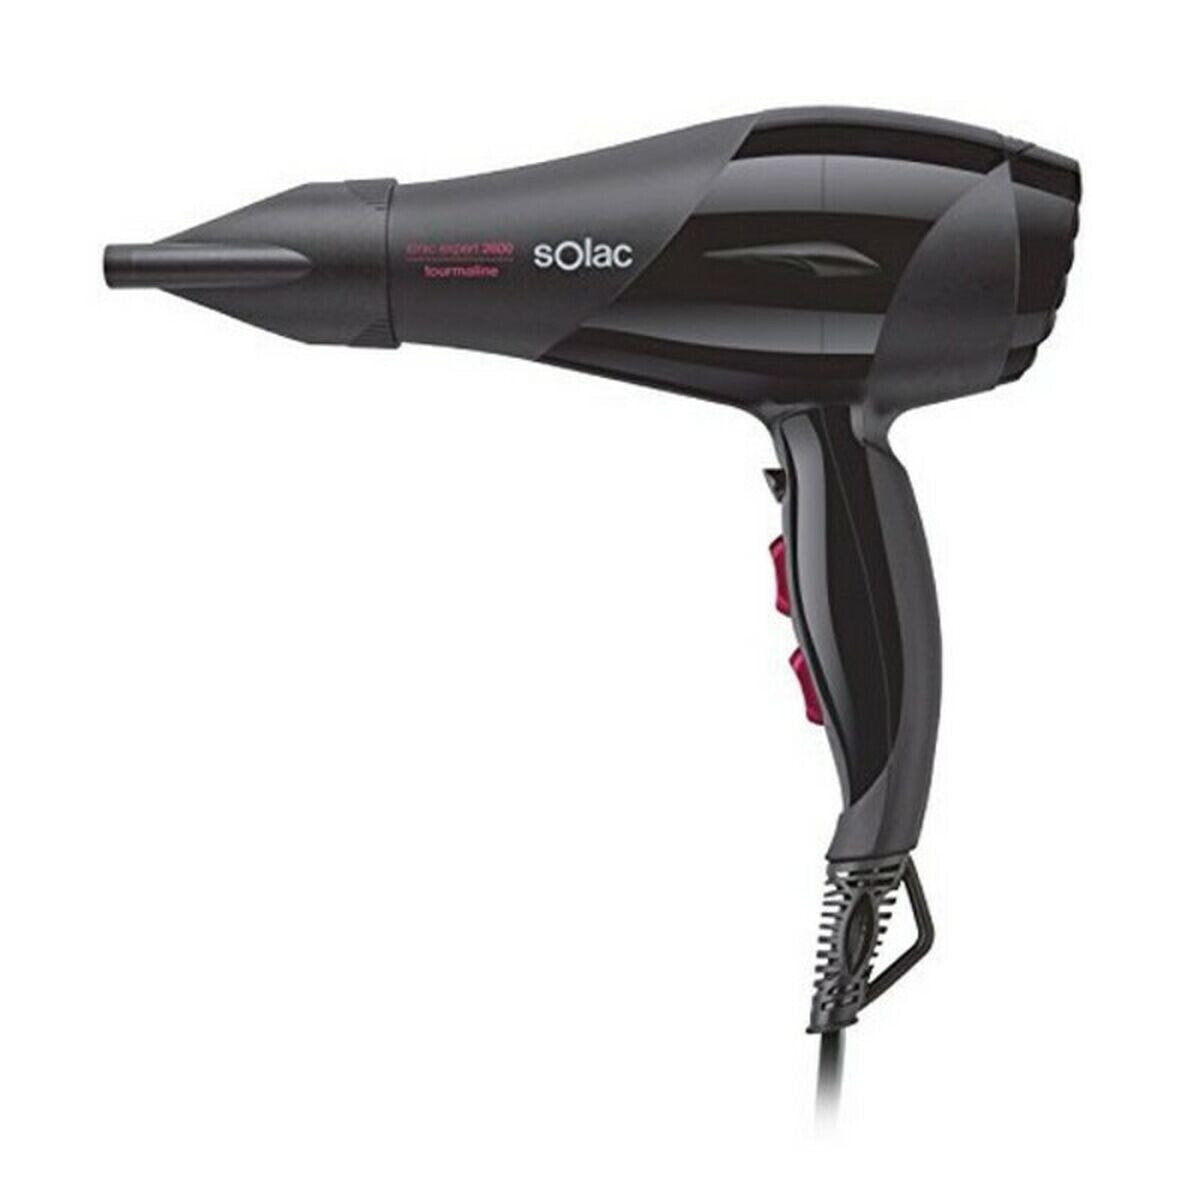 Hairdryer Solac SP7170 2600W IONIC